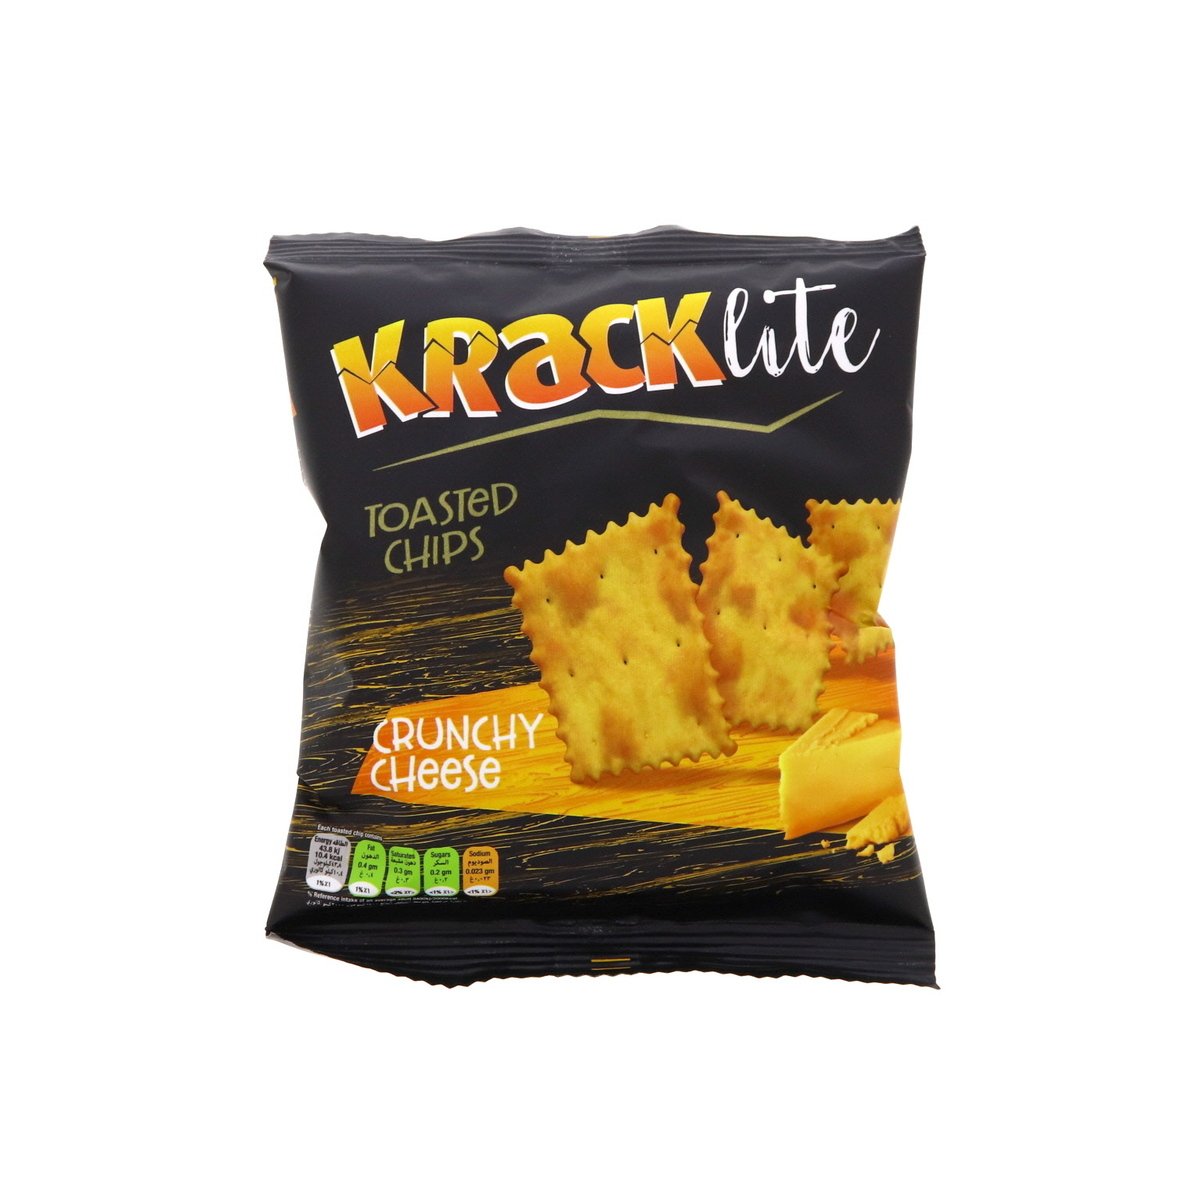 Kracklite Toasted Chips Crunchy Cheese 12 X 26g Online At Best Price Other Crisps Lulu Uae 5957